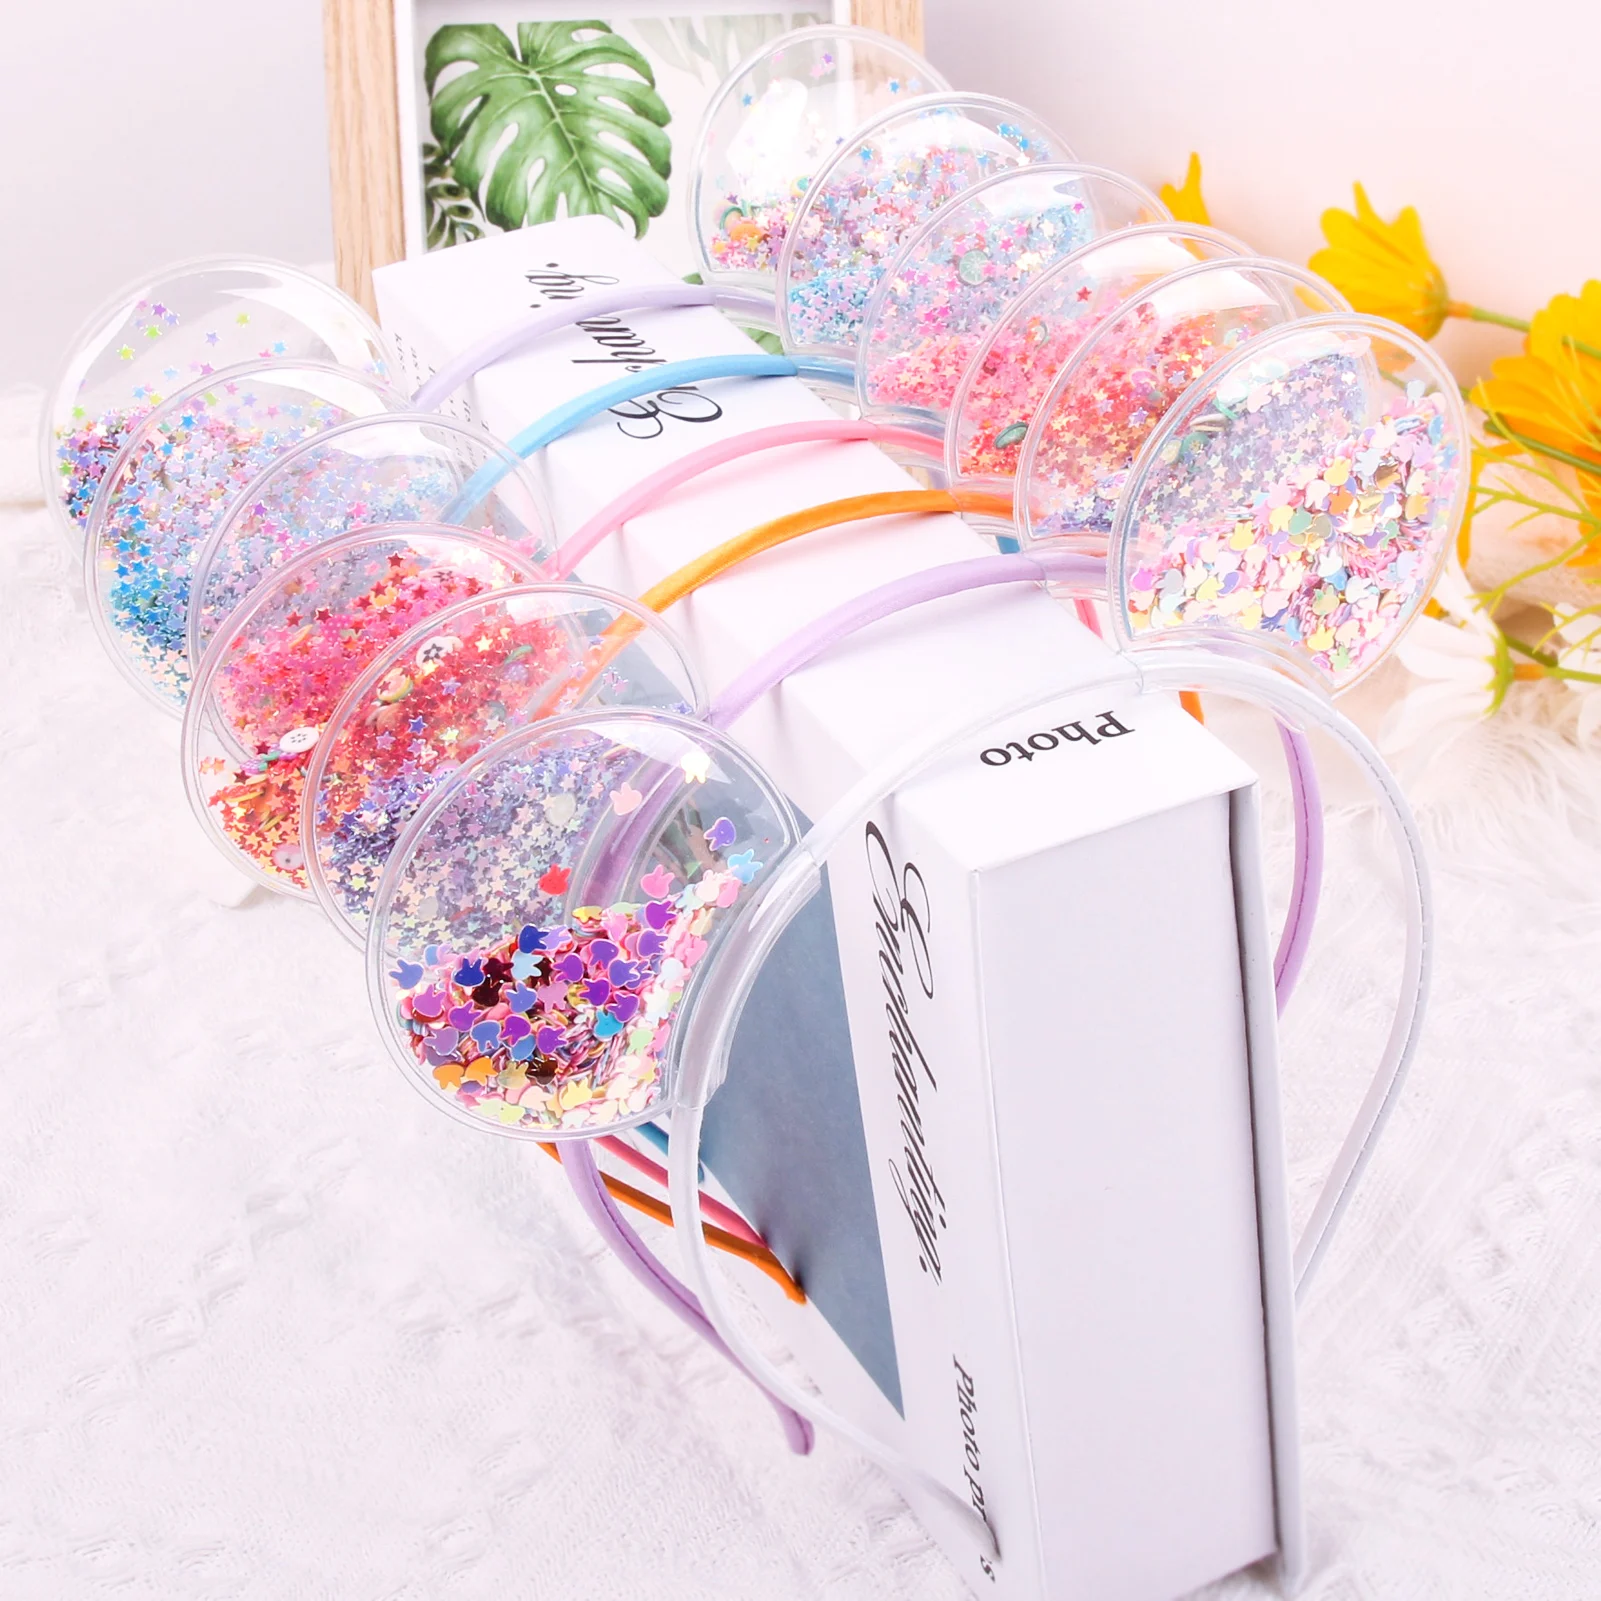 Candygirl Transparent Cat Ears Headband Quicksand Bows Hair Hoop Cute Colorful Sequins Hairbands Girls Princess Hair Accessories candygirl 2 5cm dazzling flowers waves style hair bands cute children girl party festival hairband hair accessories diademas